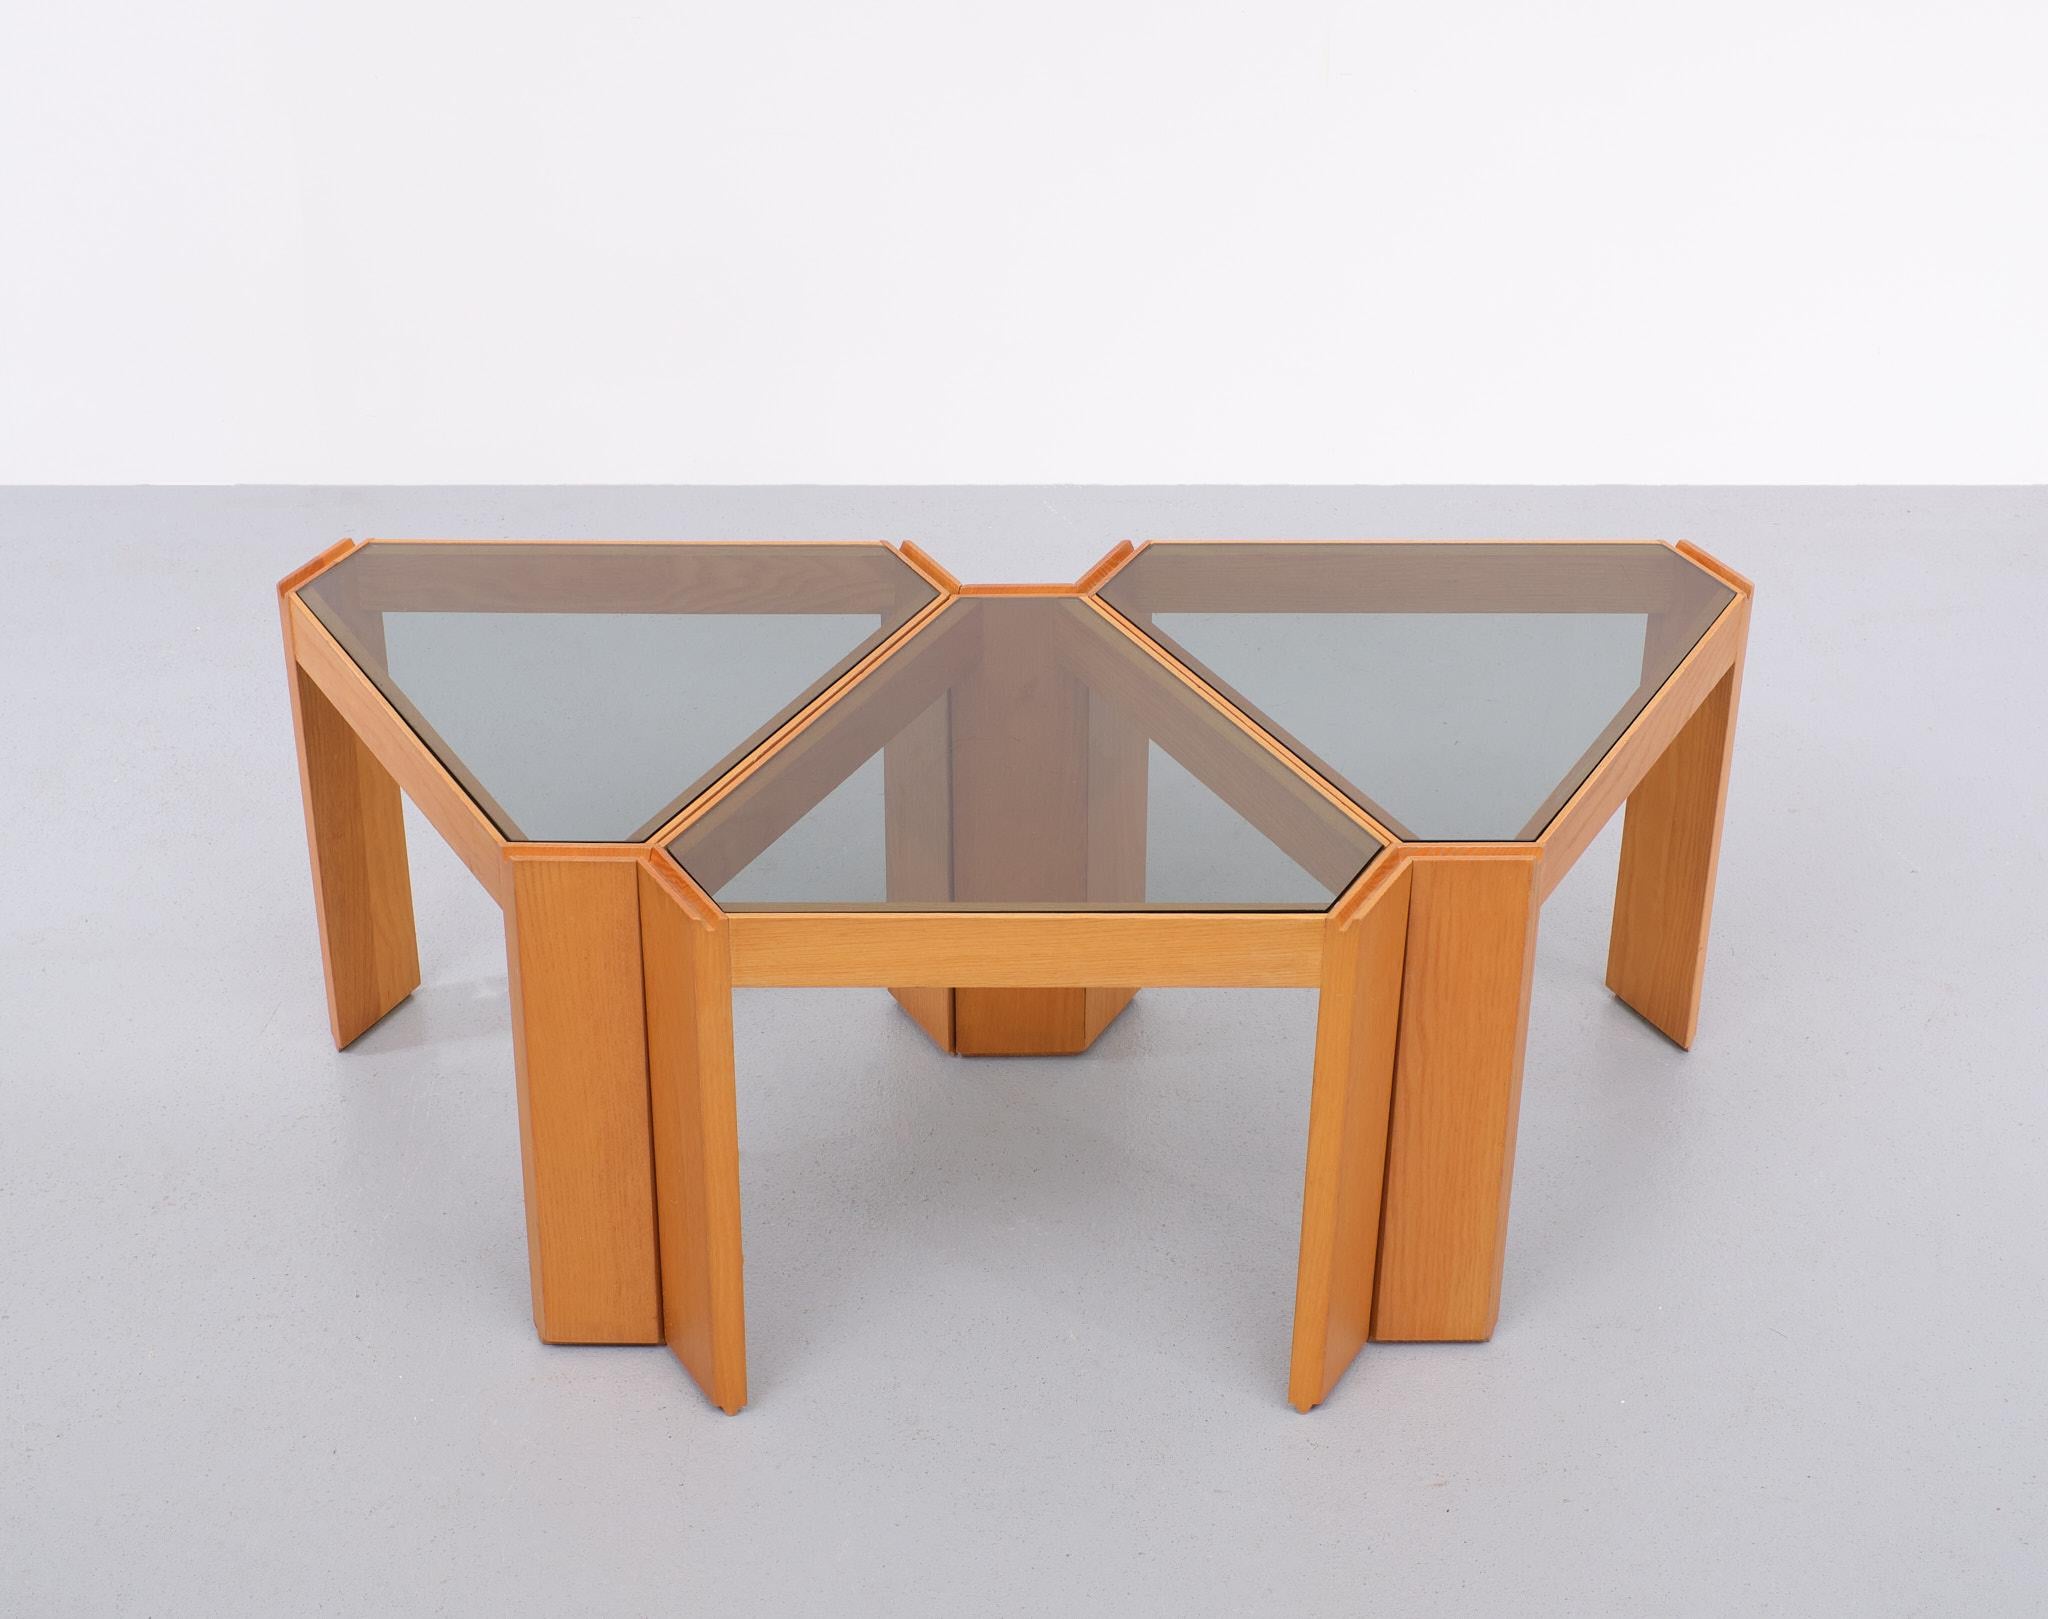 Very nice set of triangle shaped side tables by Porada Arrendi. These beautiful side tables were produced in the 1970s in Italy. They can be arranged in many different forms or stacked on top of each other. They're made from Light Oak wooden frame